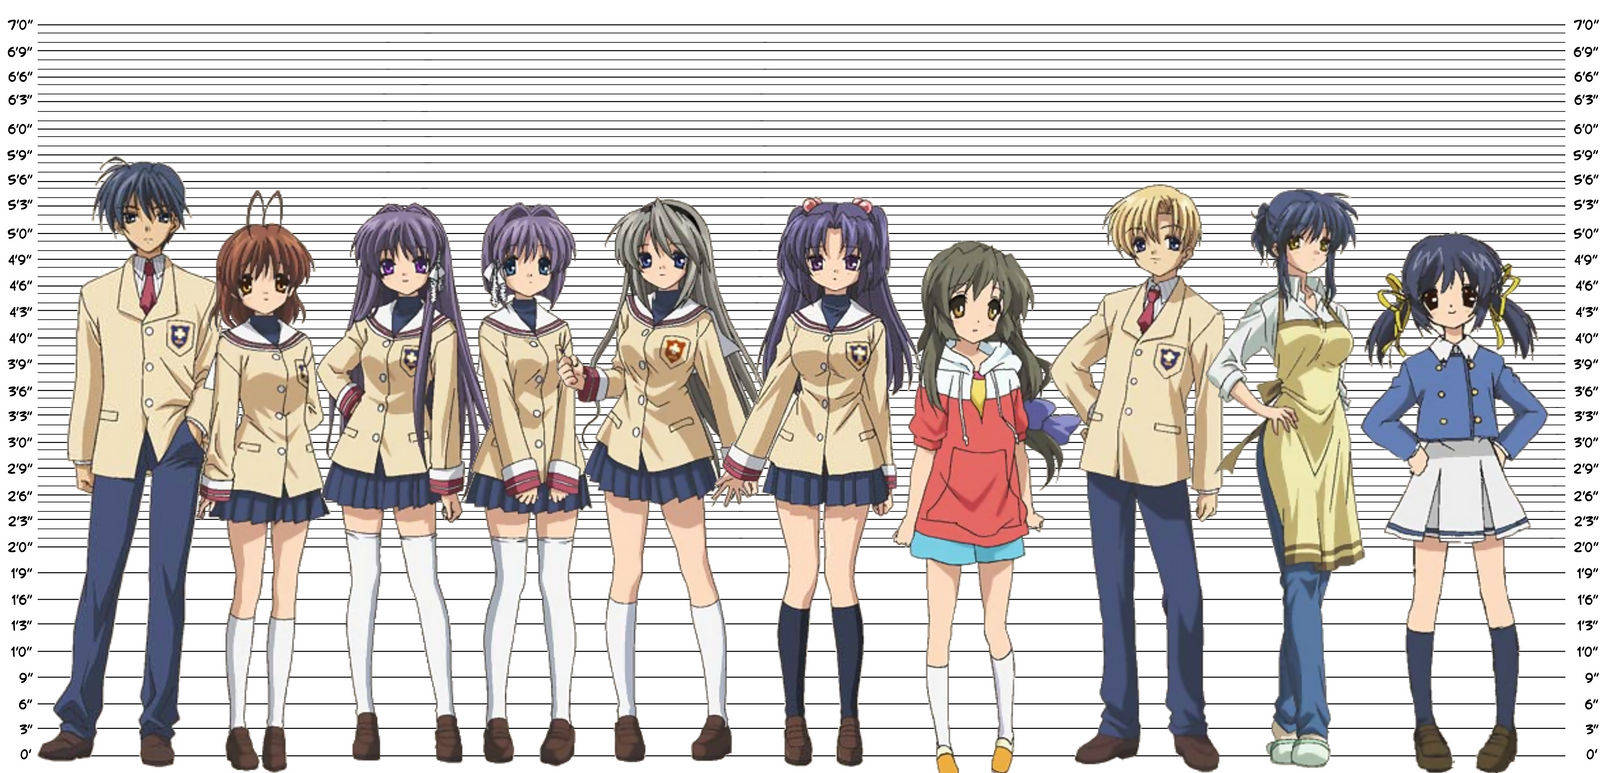 The Clannad Casts Wallpaper